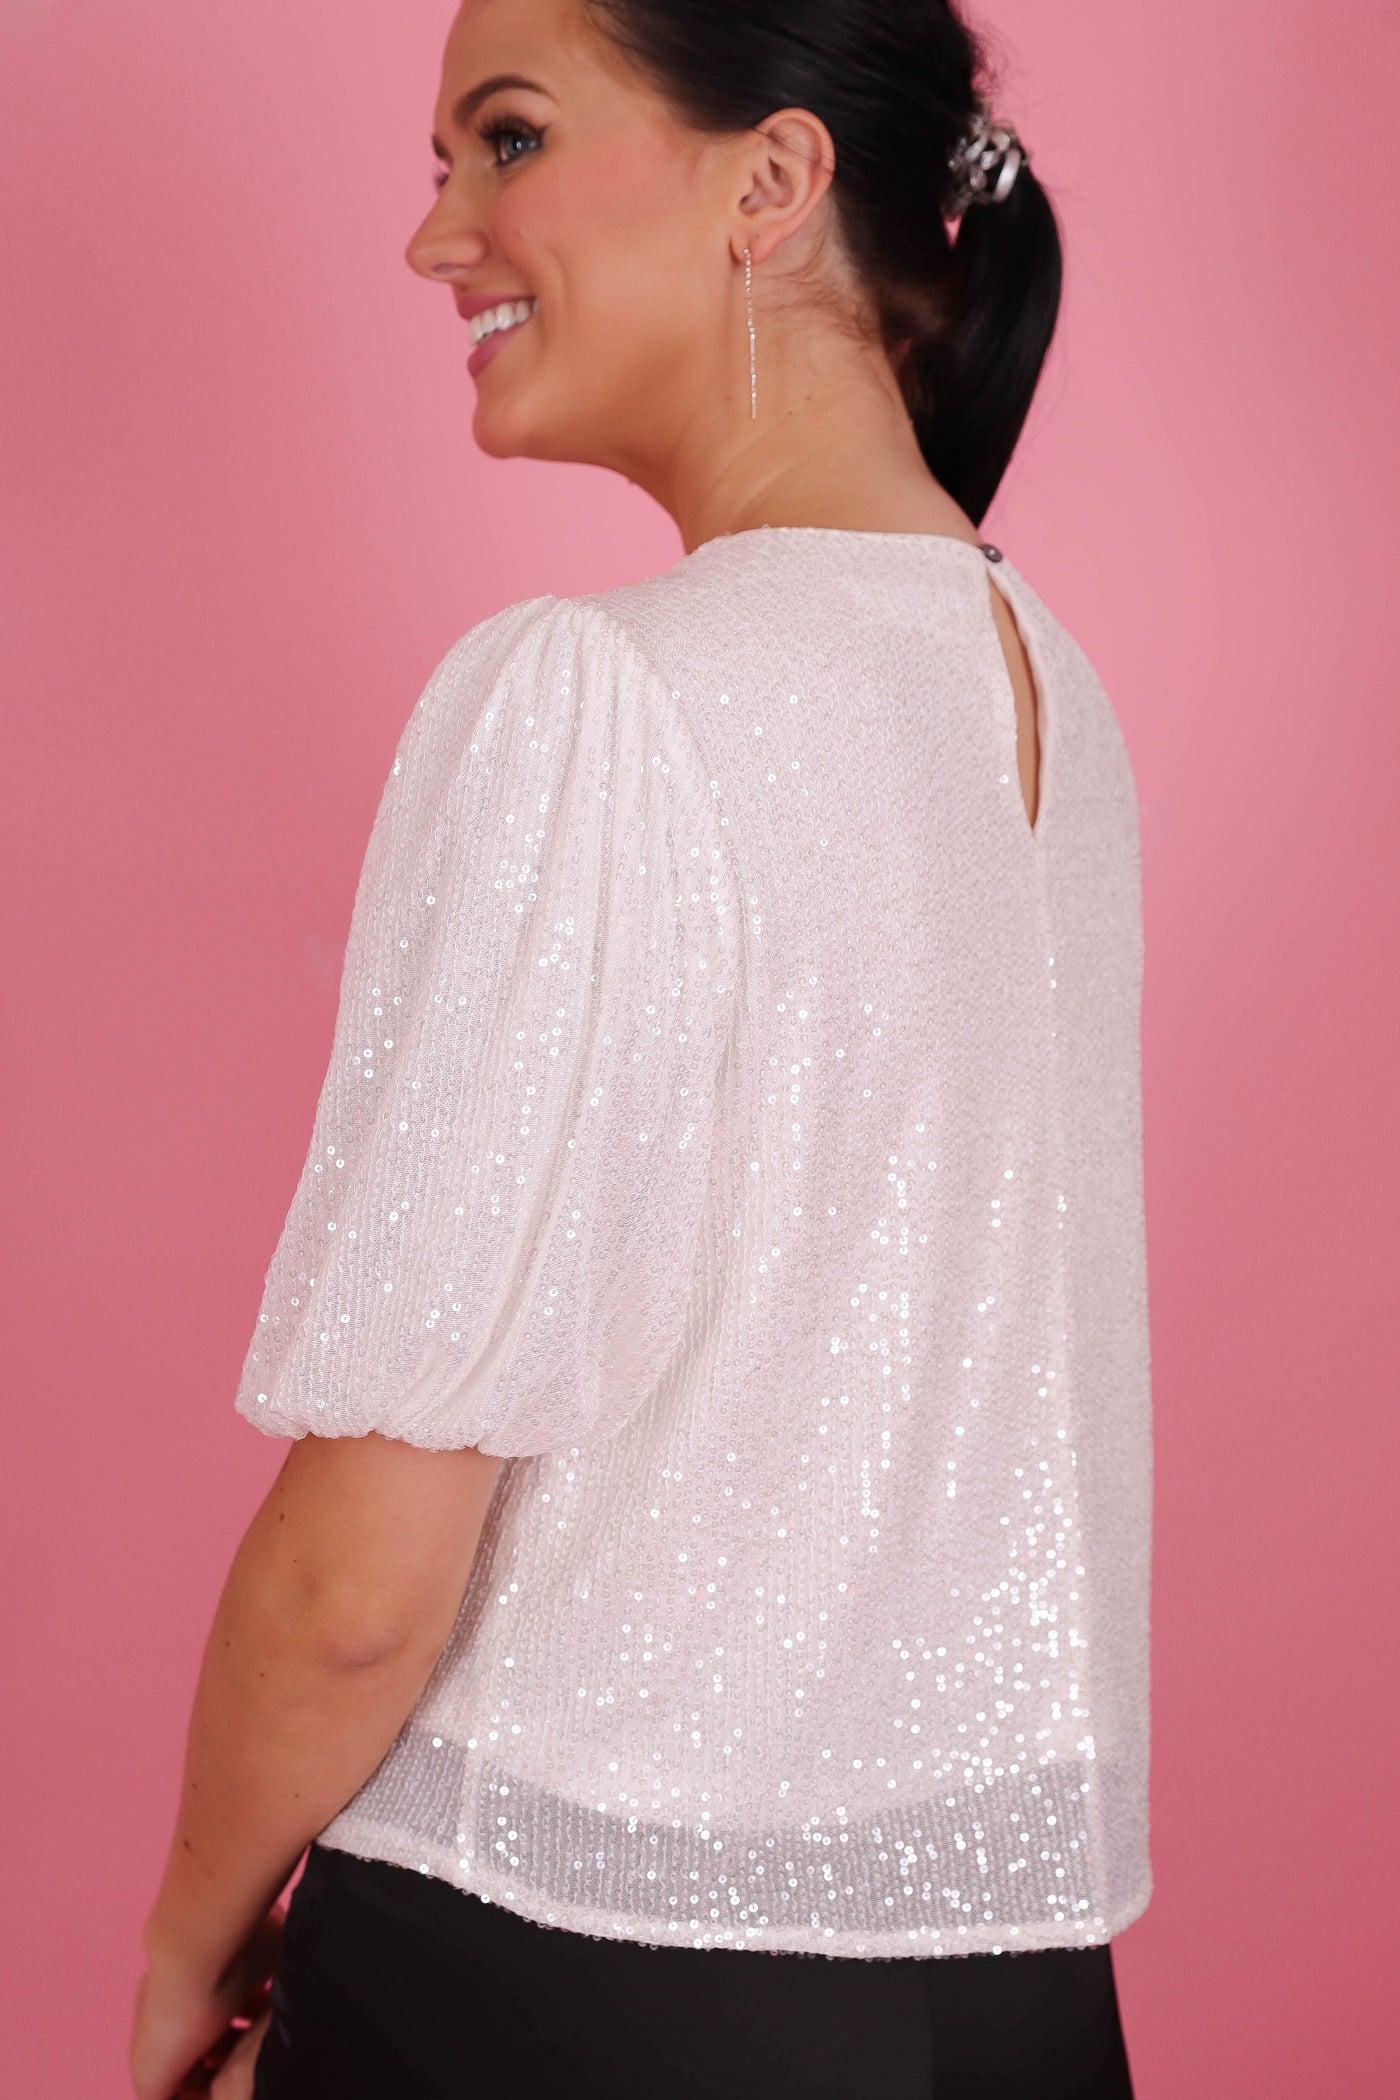 Women's White Sequin Blouse- Women's Holiday Tops- She + Sky Sequin Top